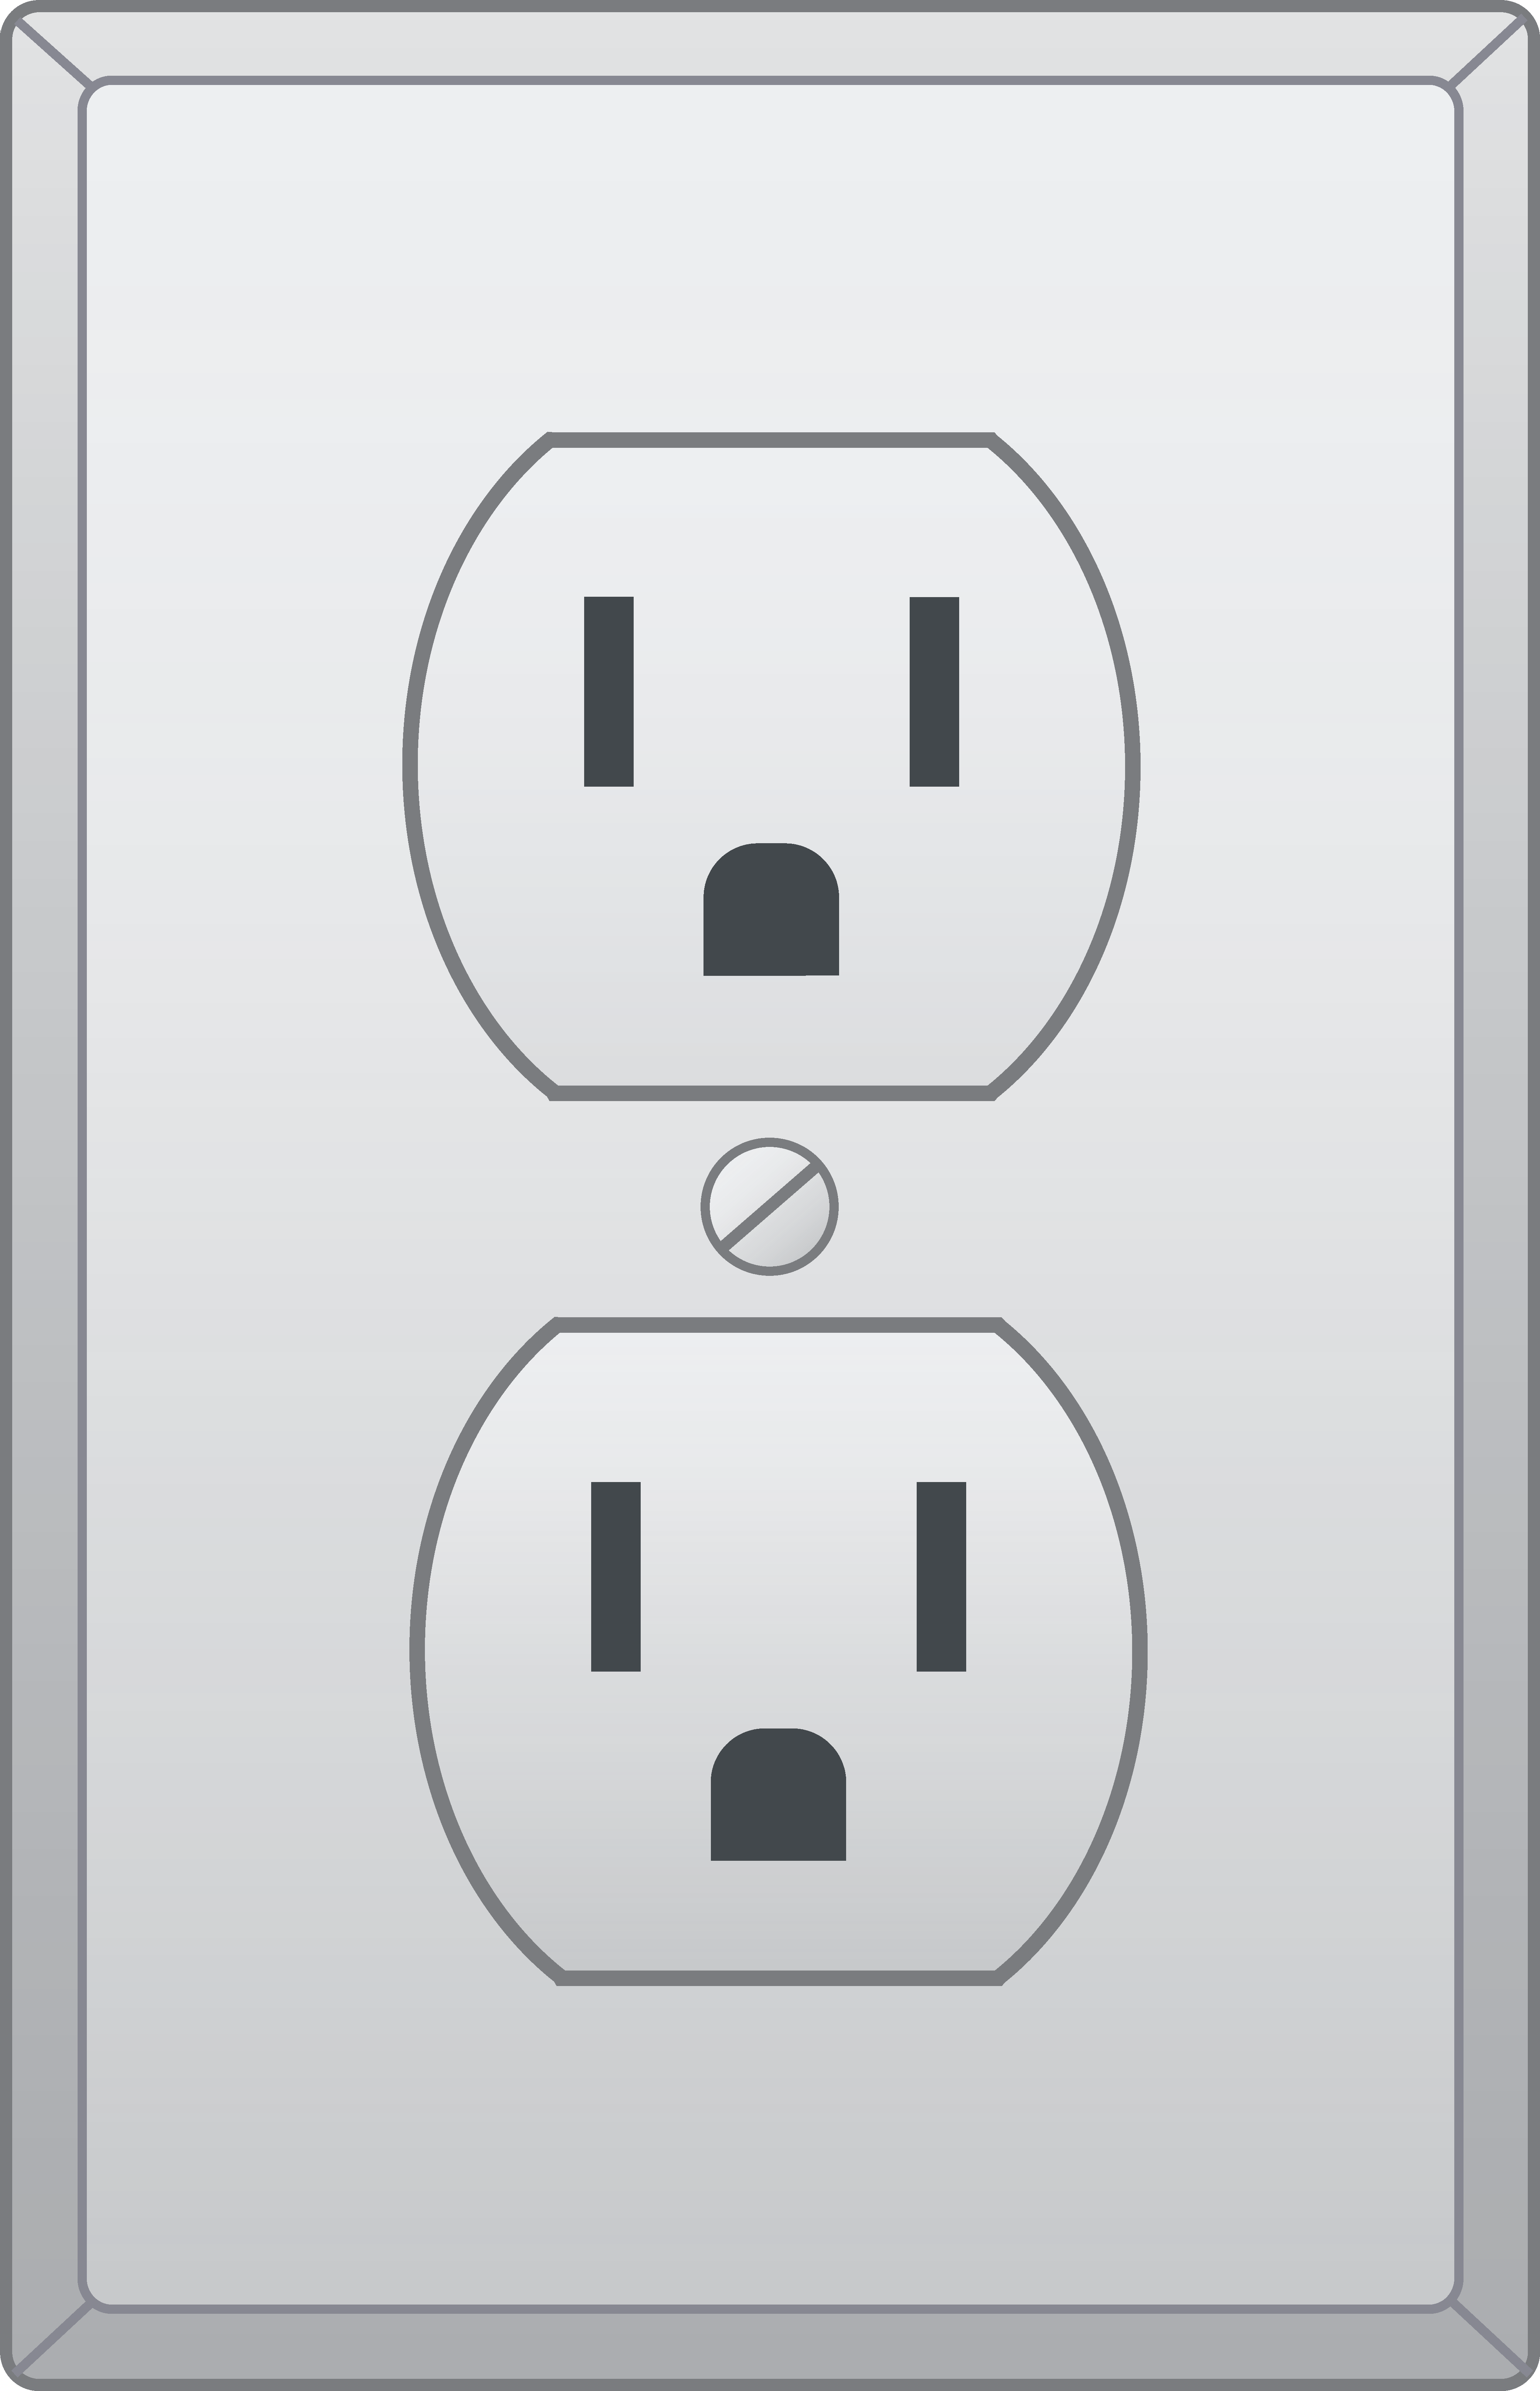 American, electric, electricity, energy, female, outlet, plug 